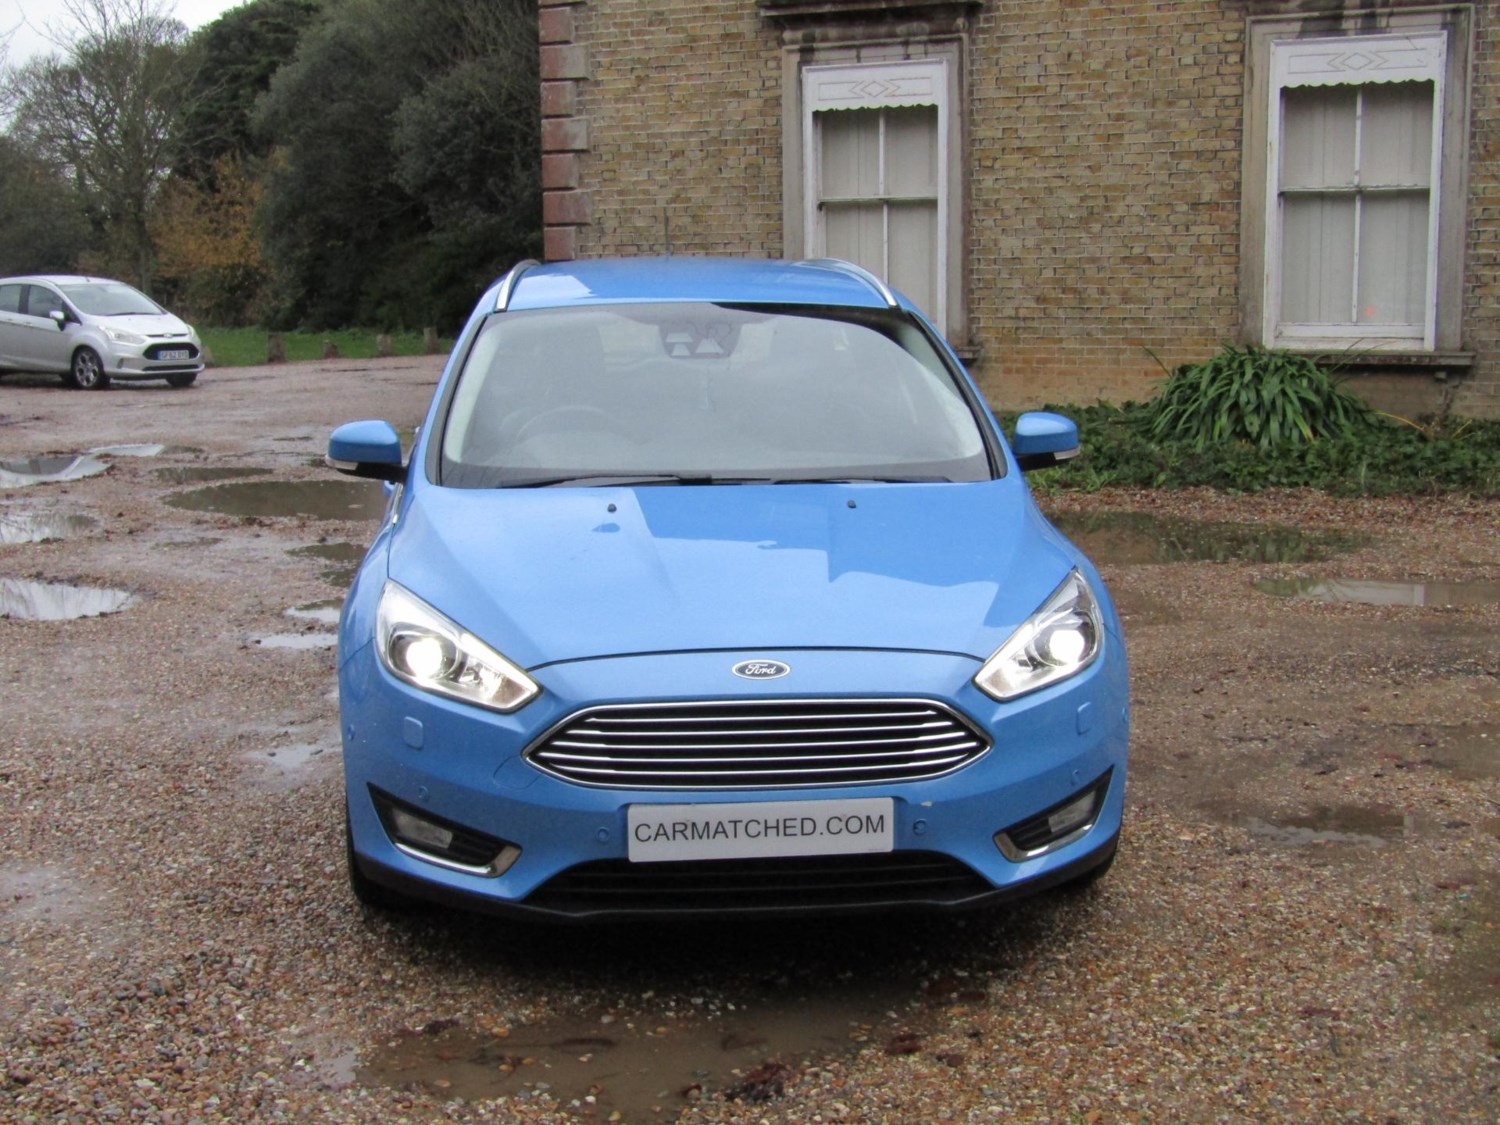 2018 (67) Ford Focus 1.0 EcoBoost 125 Titanium X 5dr Auto For Sale In Broadstairs, Kent